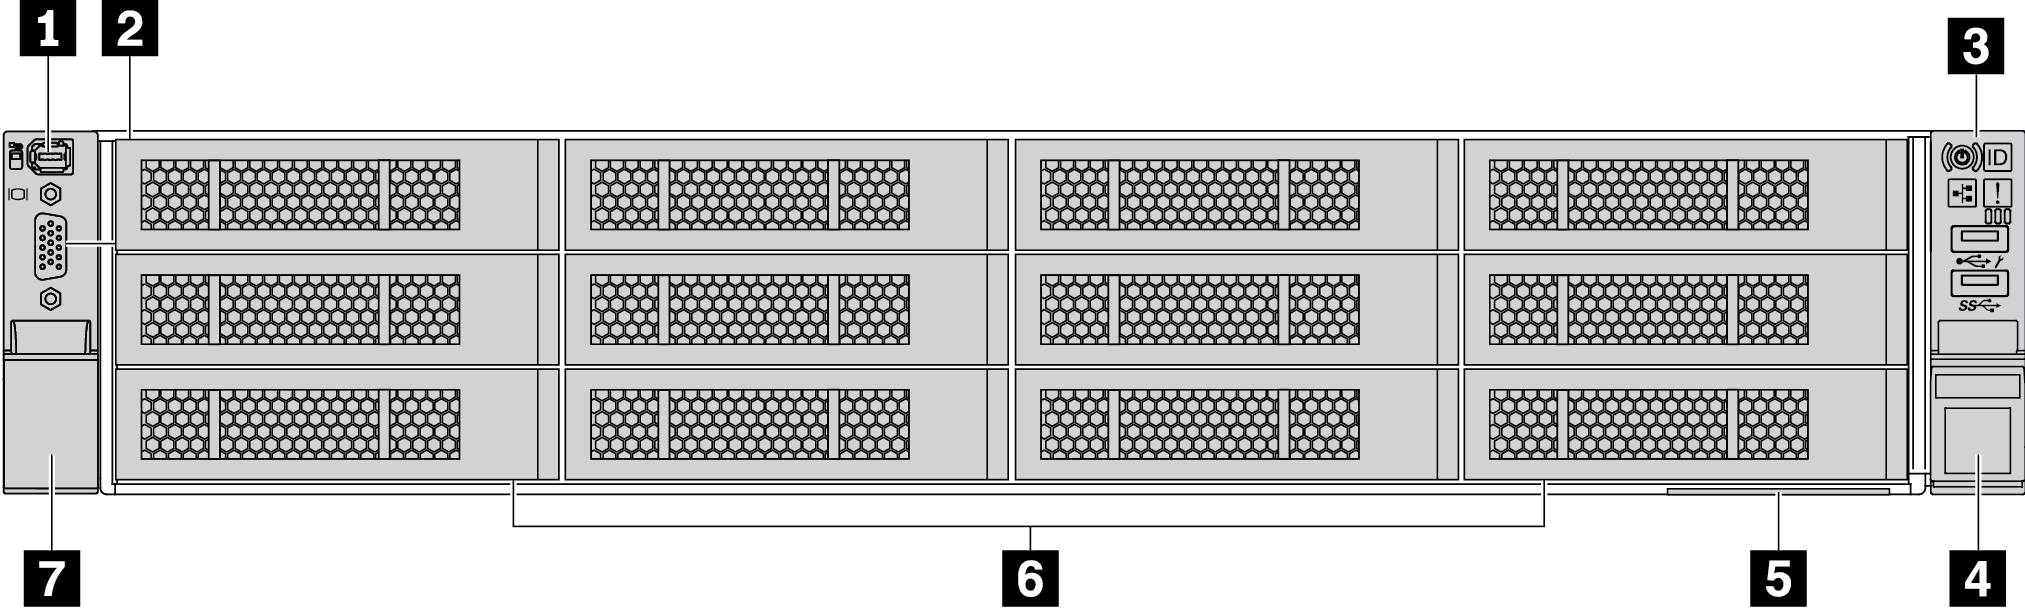 Front view of server models with 3.5-inch front drive bays (without backplanes)